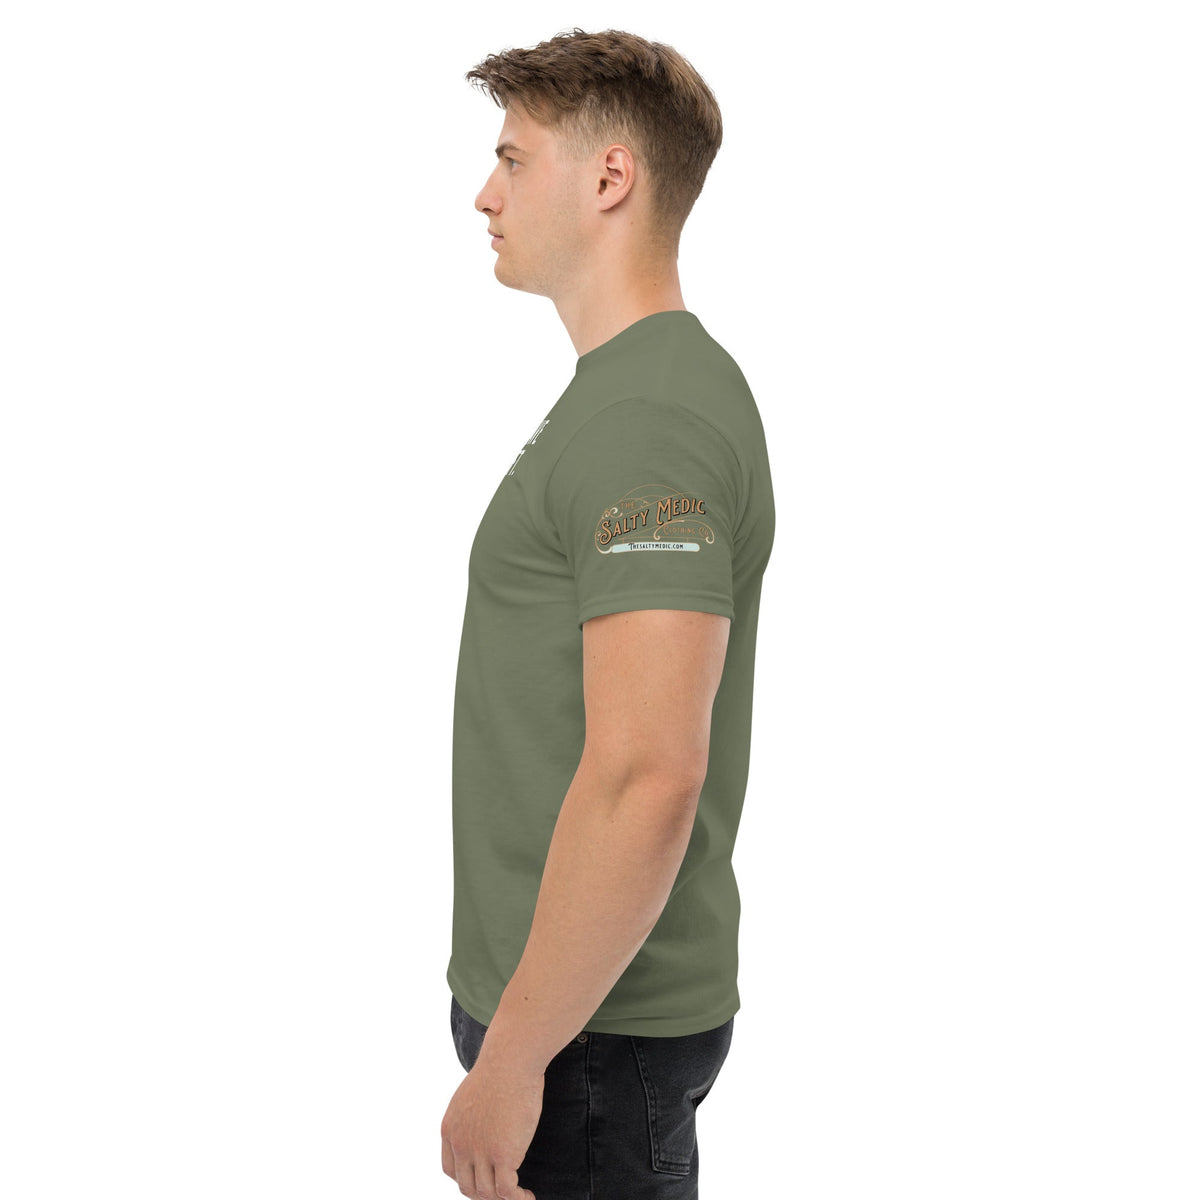 I hope you have a quiet shift Men's classic tee - Salty Medic Clothing Co.